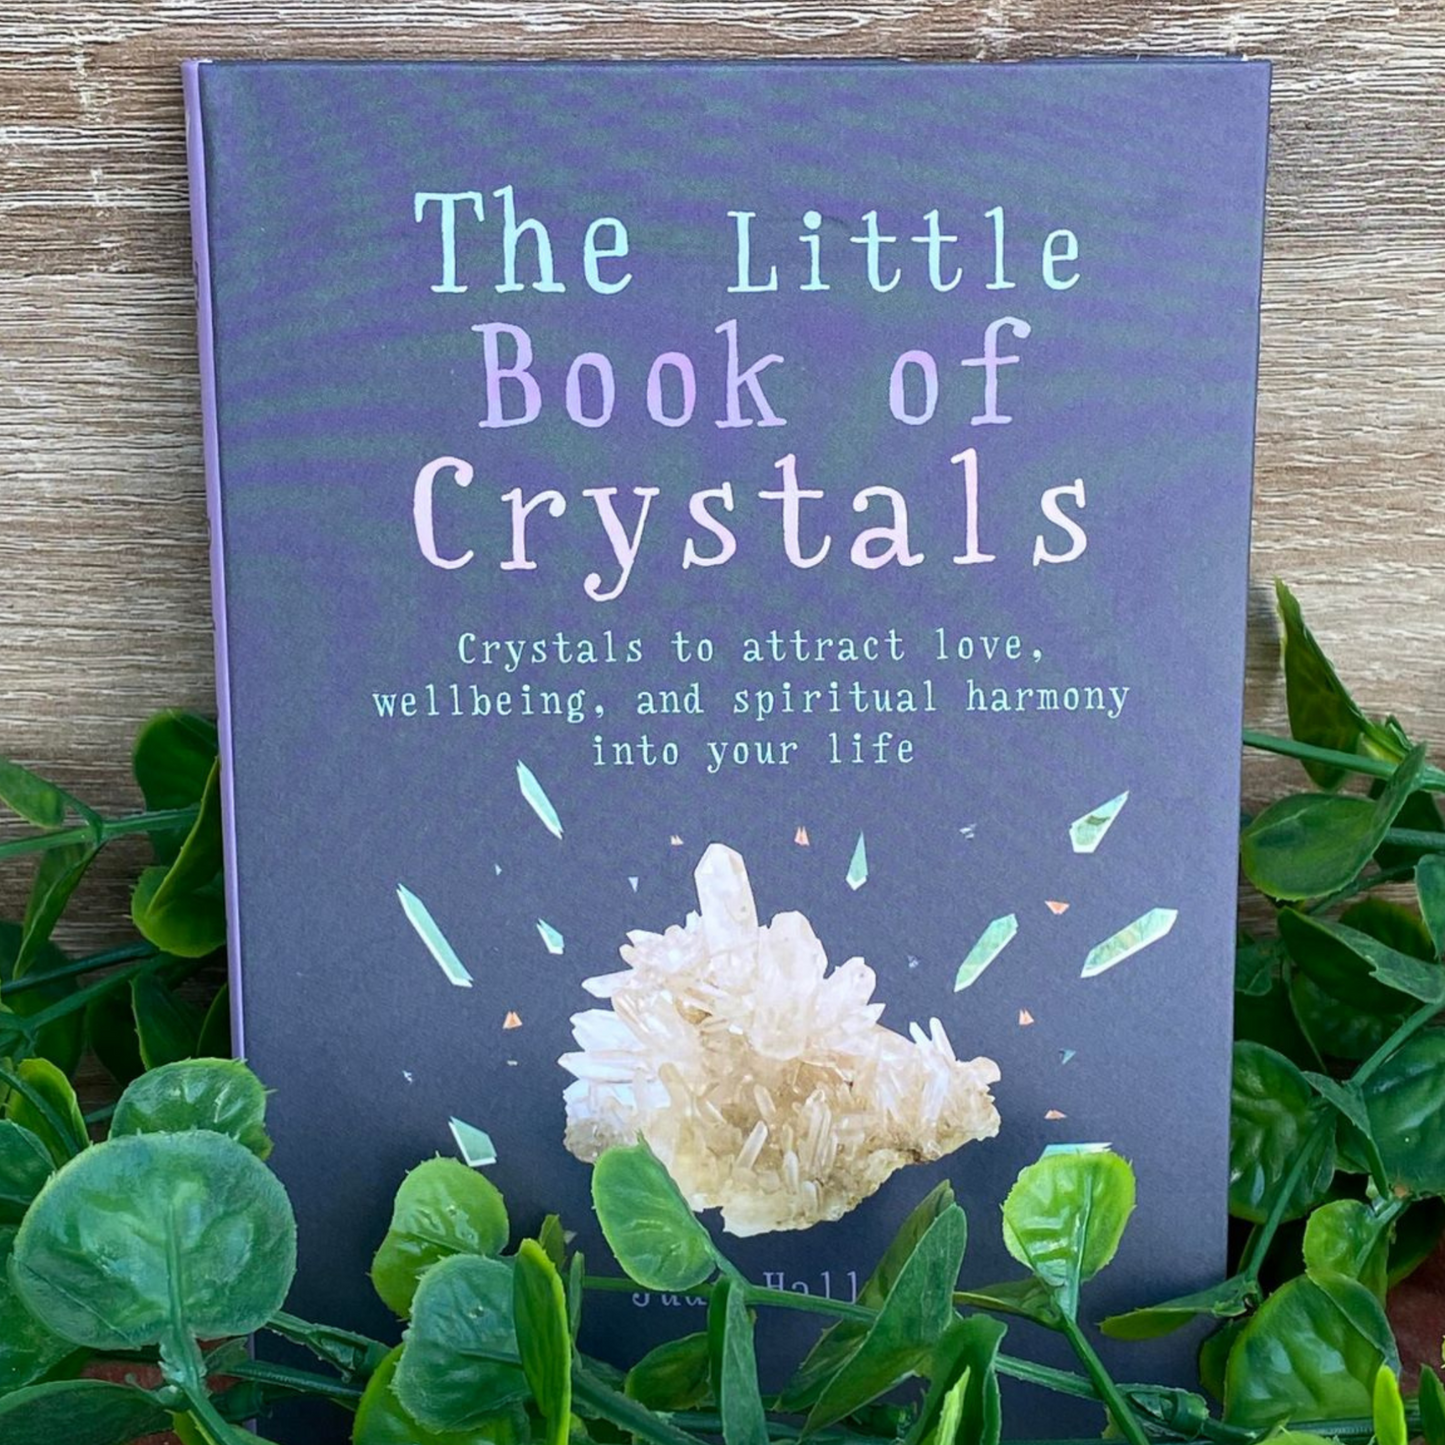 Little Book of Crystals